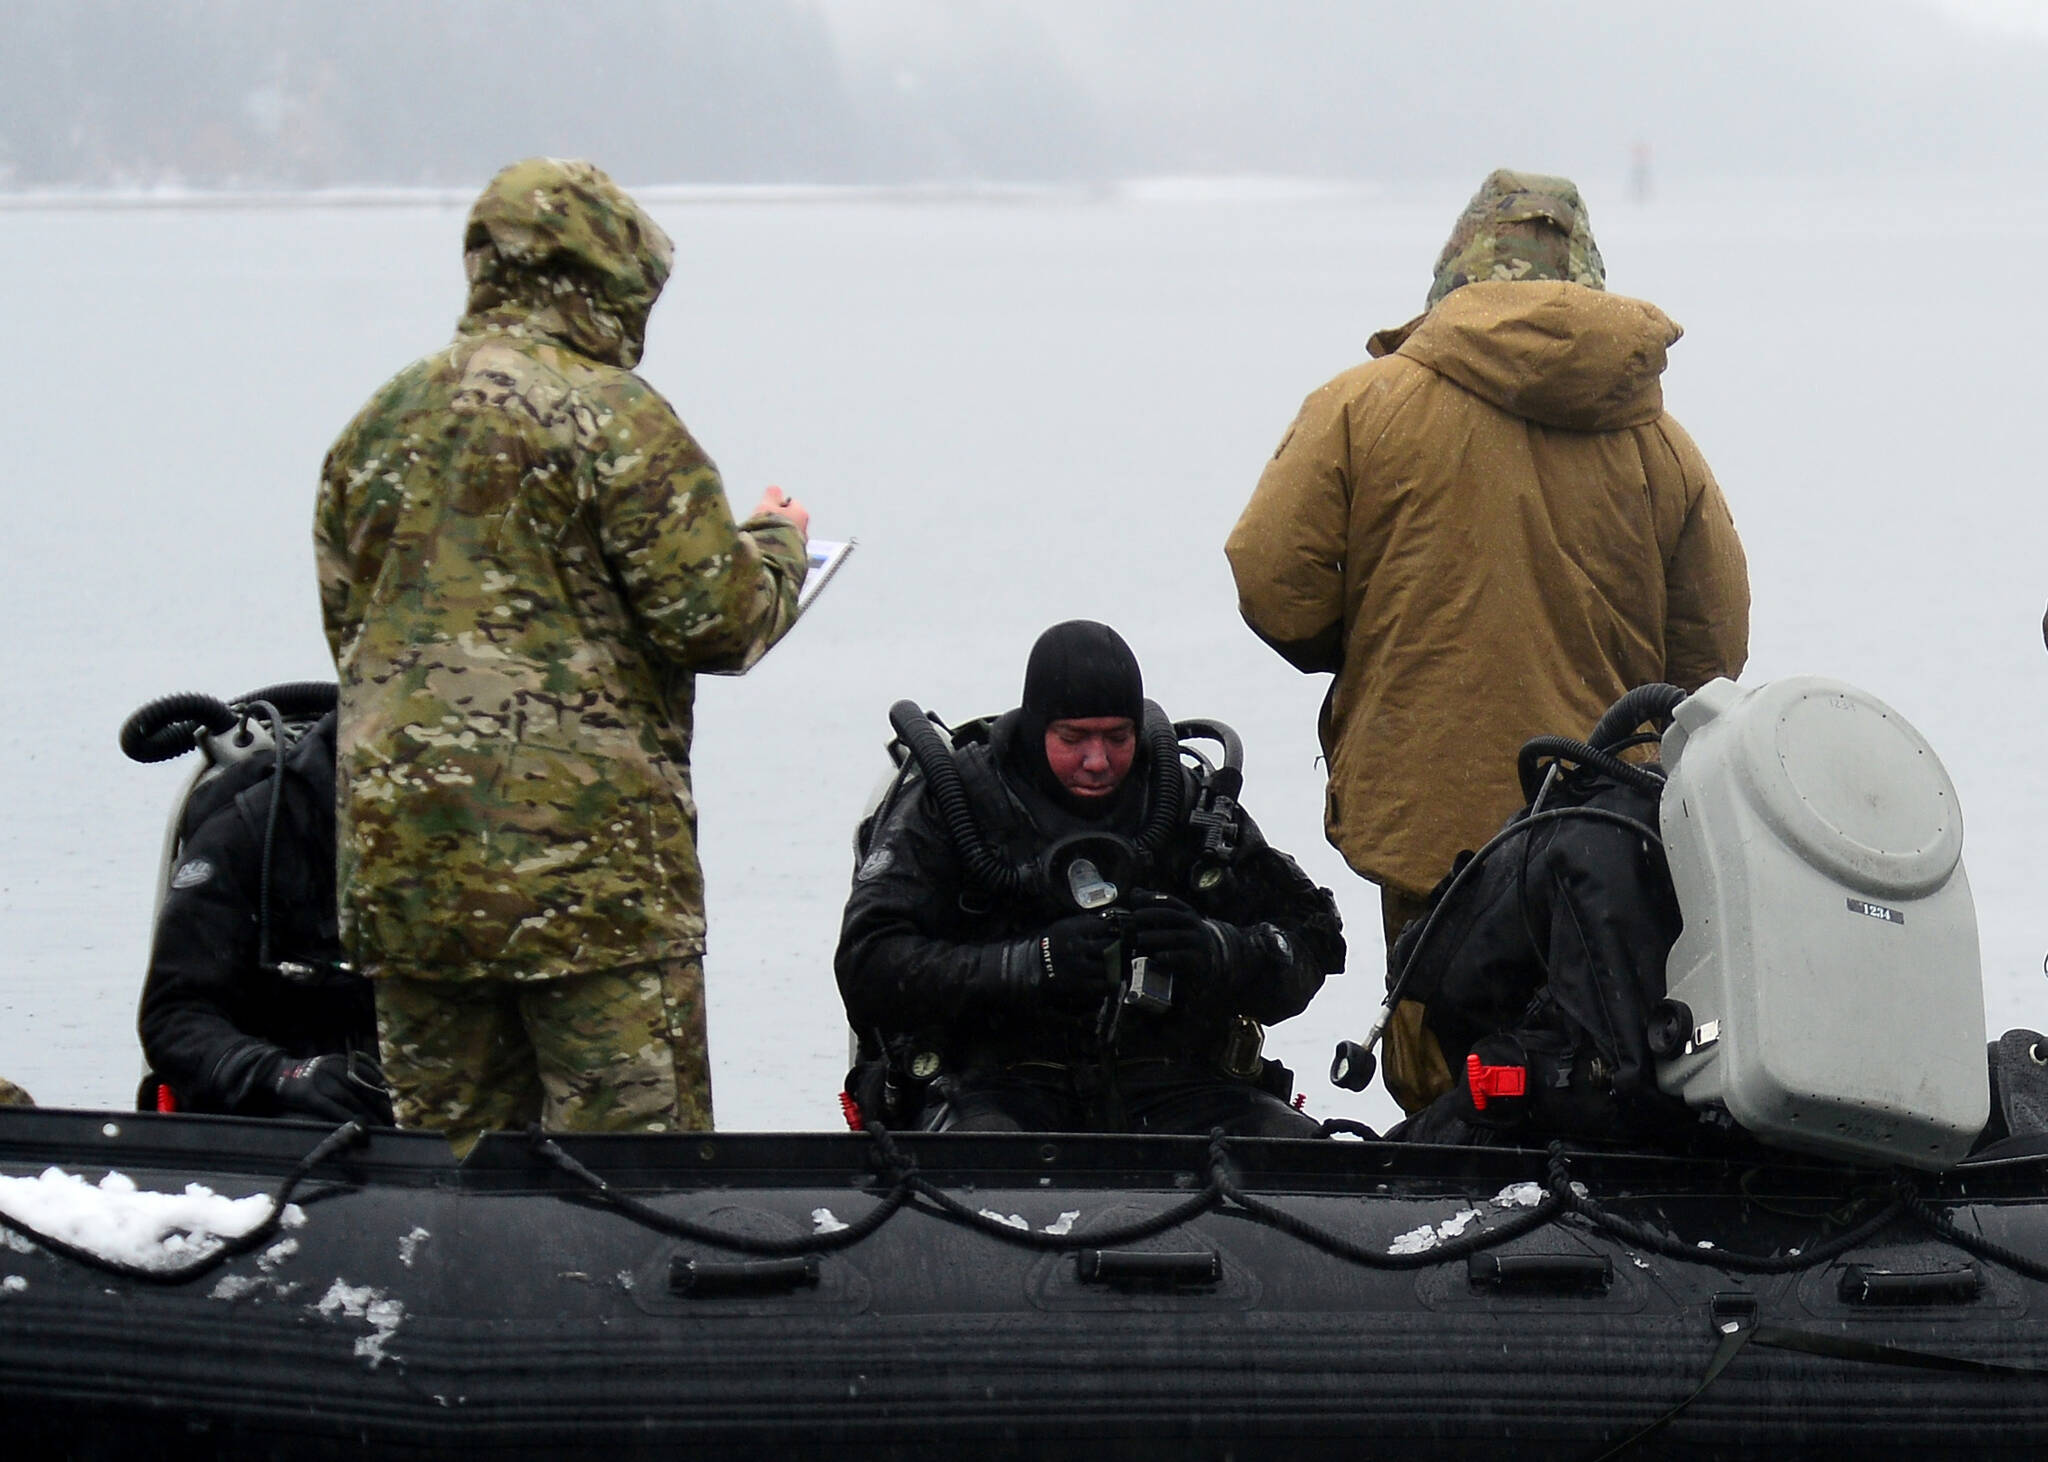 Navy explosive ordnance disposal technicians, assigned to Explosive Ordnance Disposal Mobile Unit (EODMU) 1, conduct safety checks prior to dive operations to reacquire, identify and neutralize inert mine shapes in the Gastineau Channel near Juneau, Alaska, March 11, 2022, as part of Exercise Arctic Edge 2022 (U.S. Navy / Lt. John J. Mike)